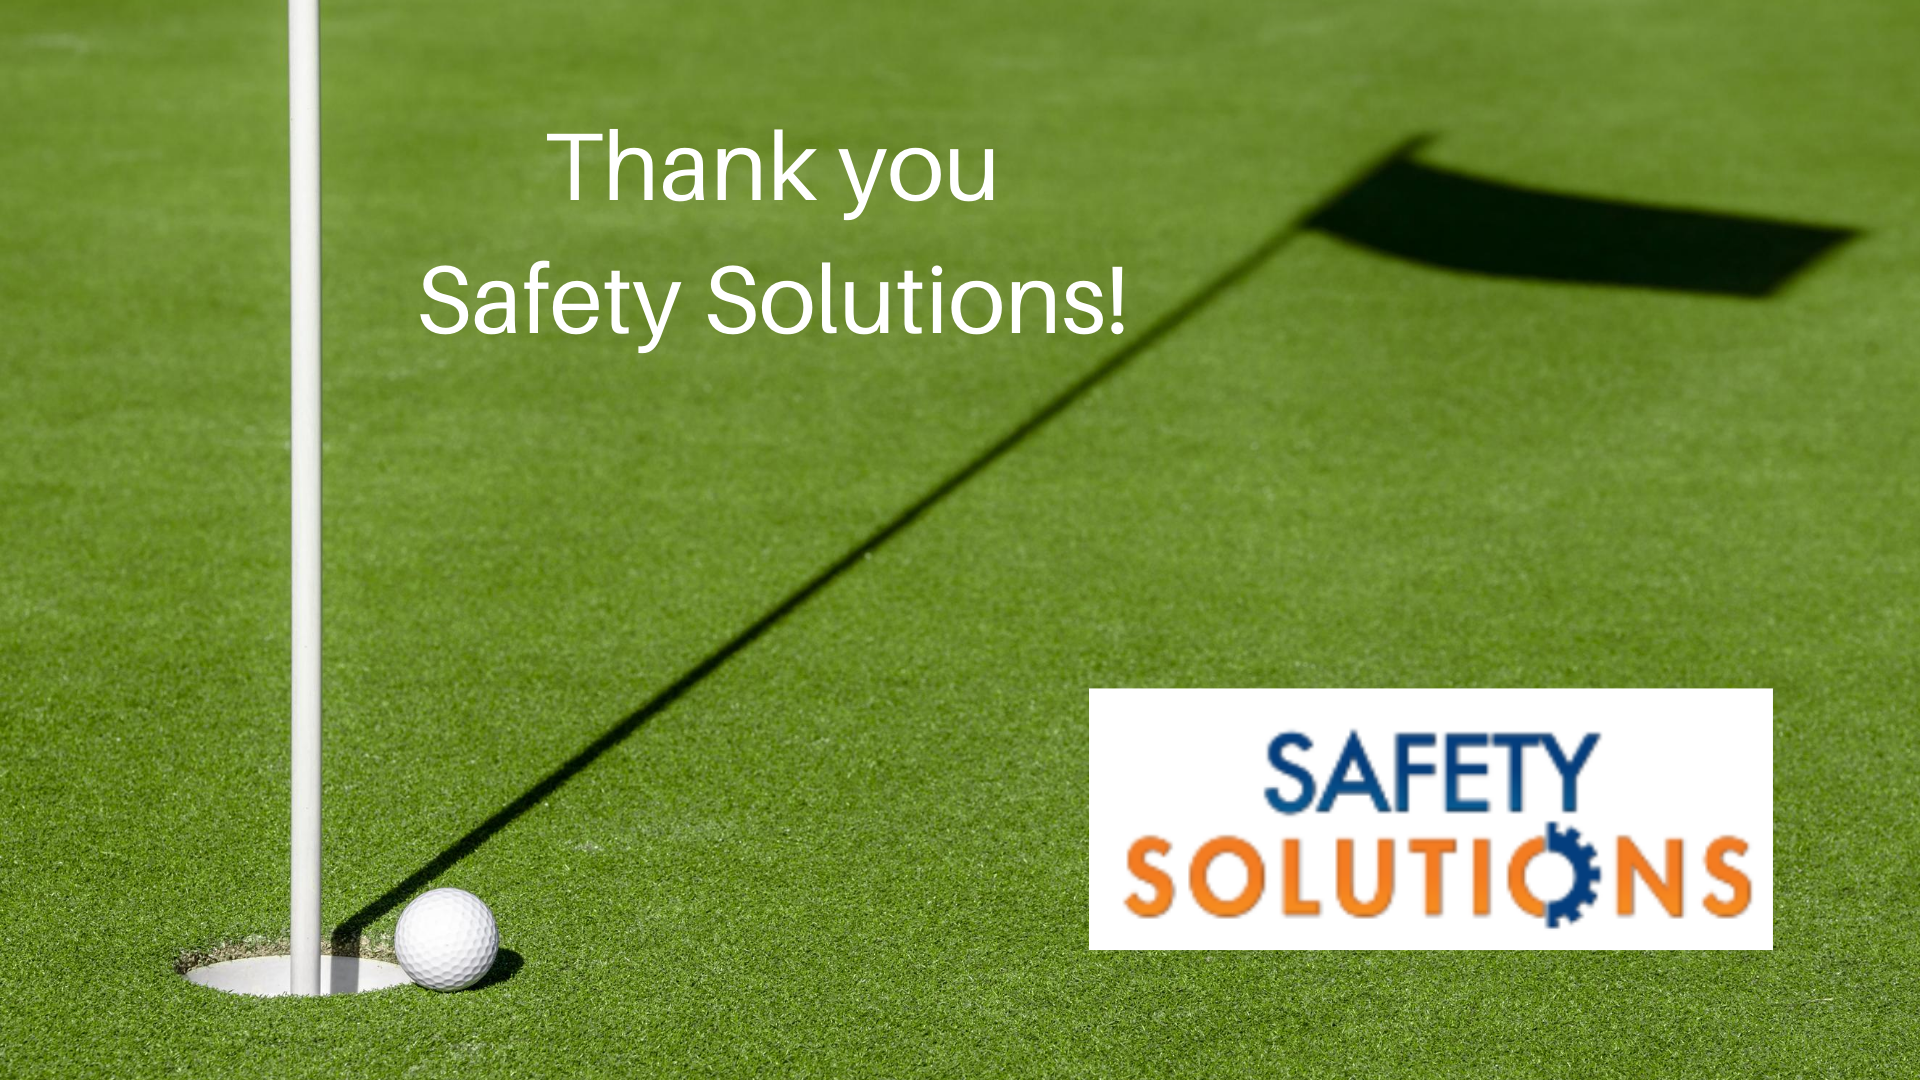 Safety Solutions